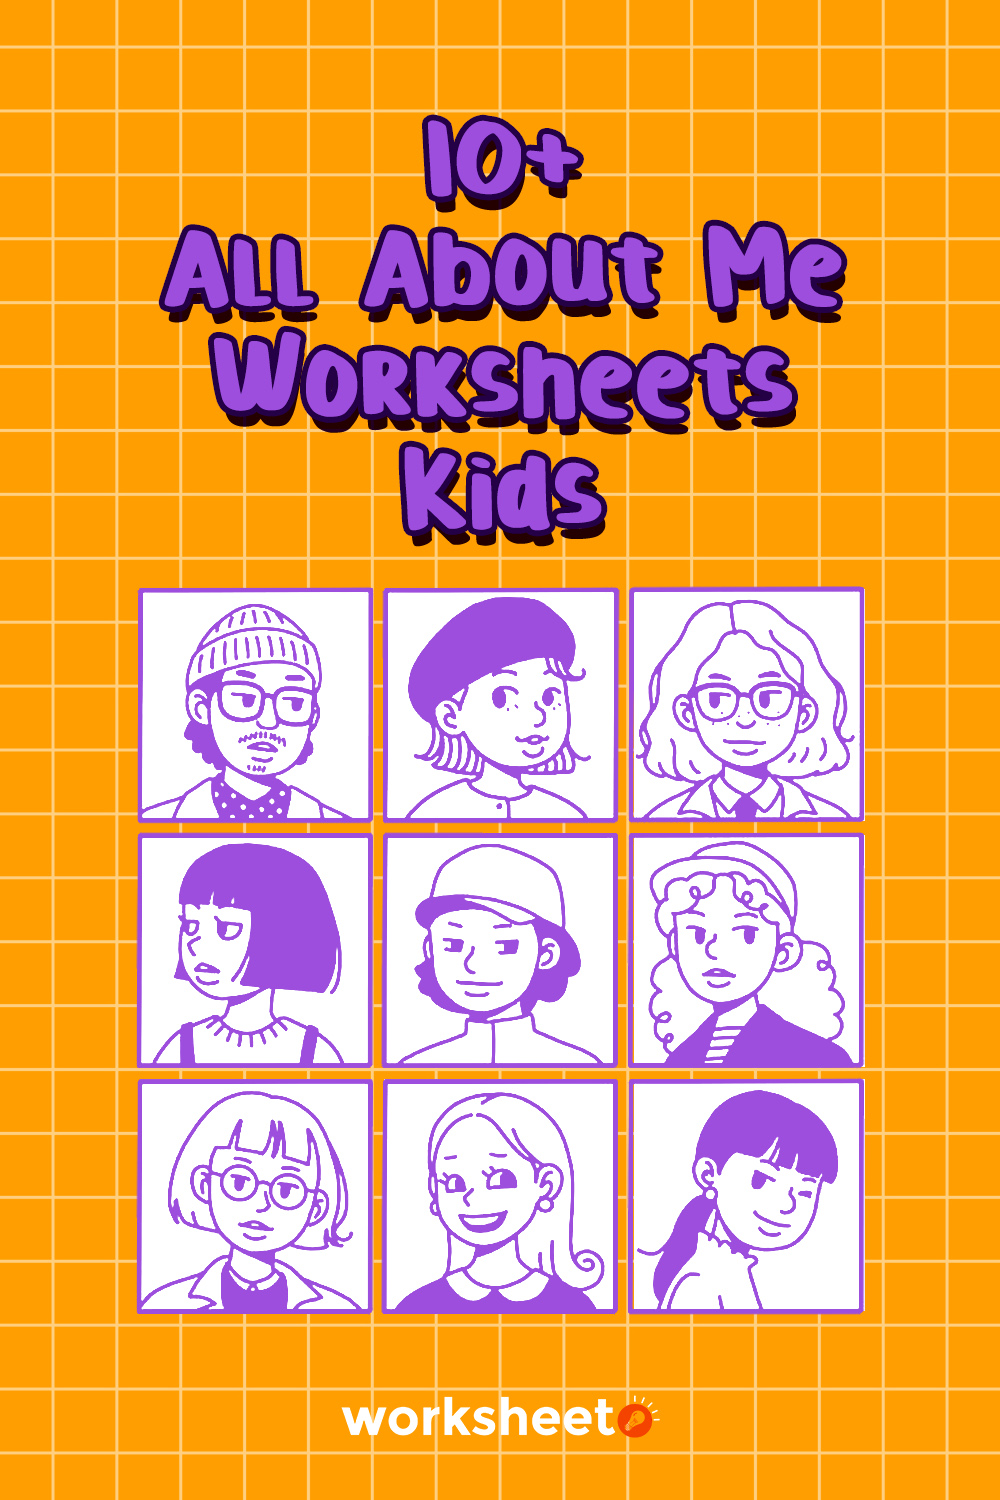 14 Images of All About Me Worksheet Kids